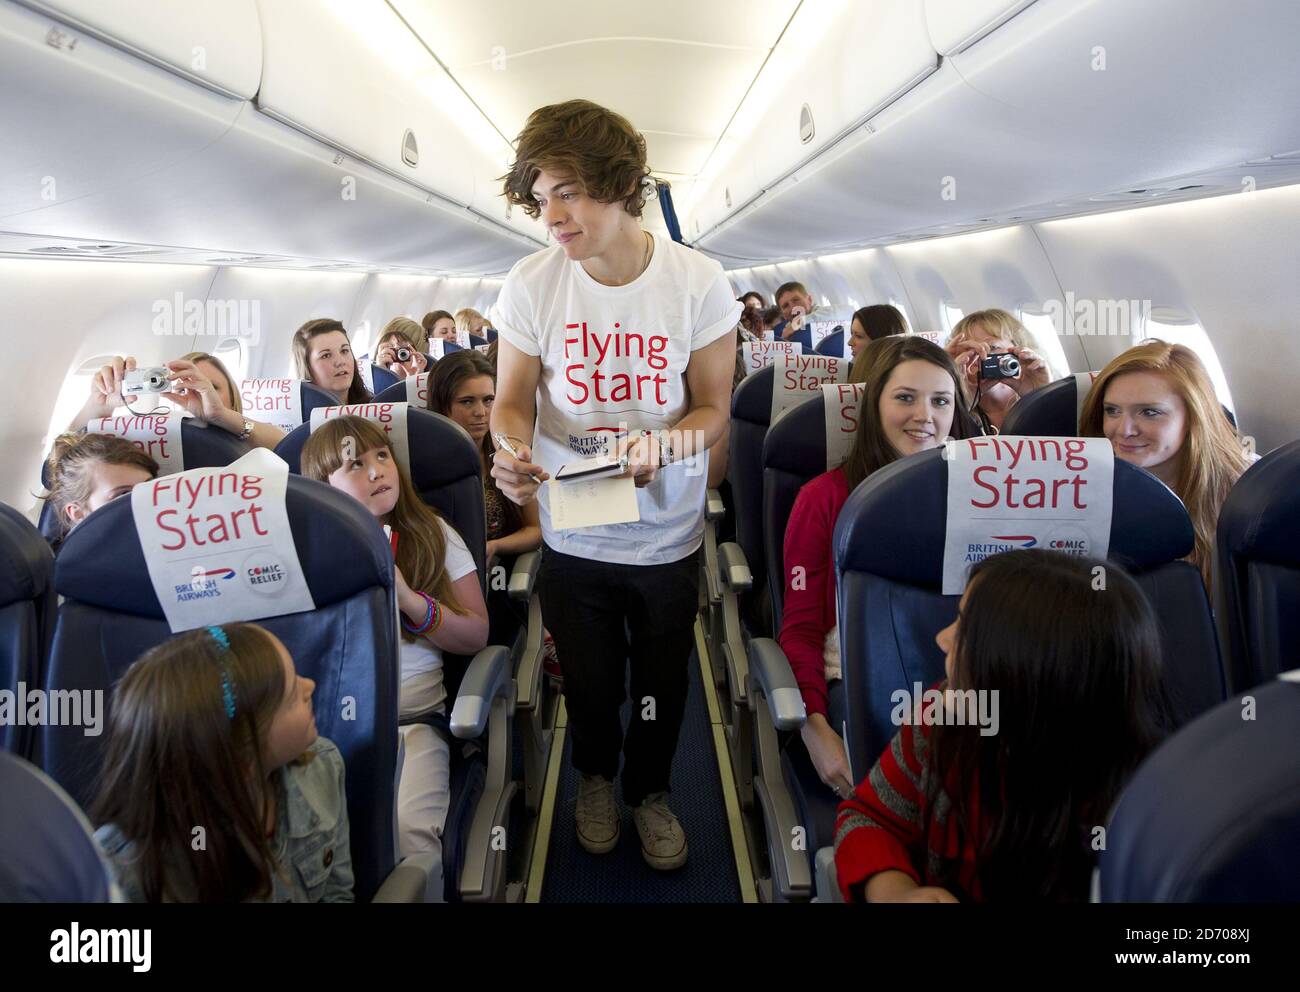 Harry Styles Of One Direction Pictured On Board Flight Ba1d A Private Charter Flight From London To Manchester Hosted By The Band For Competition Winners Which Raised A 50 000 For Flying Start